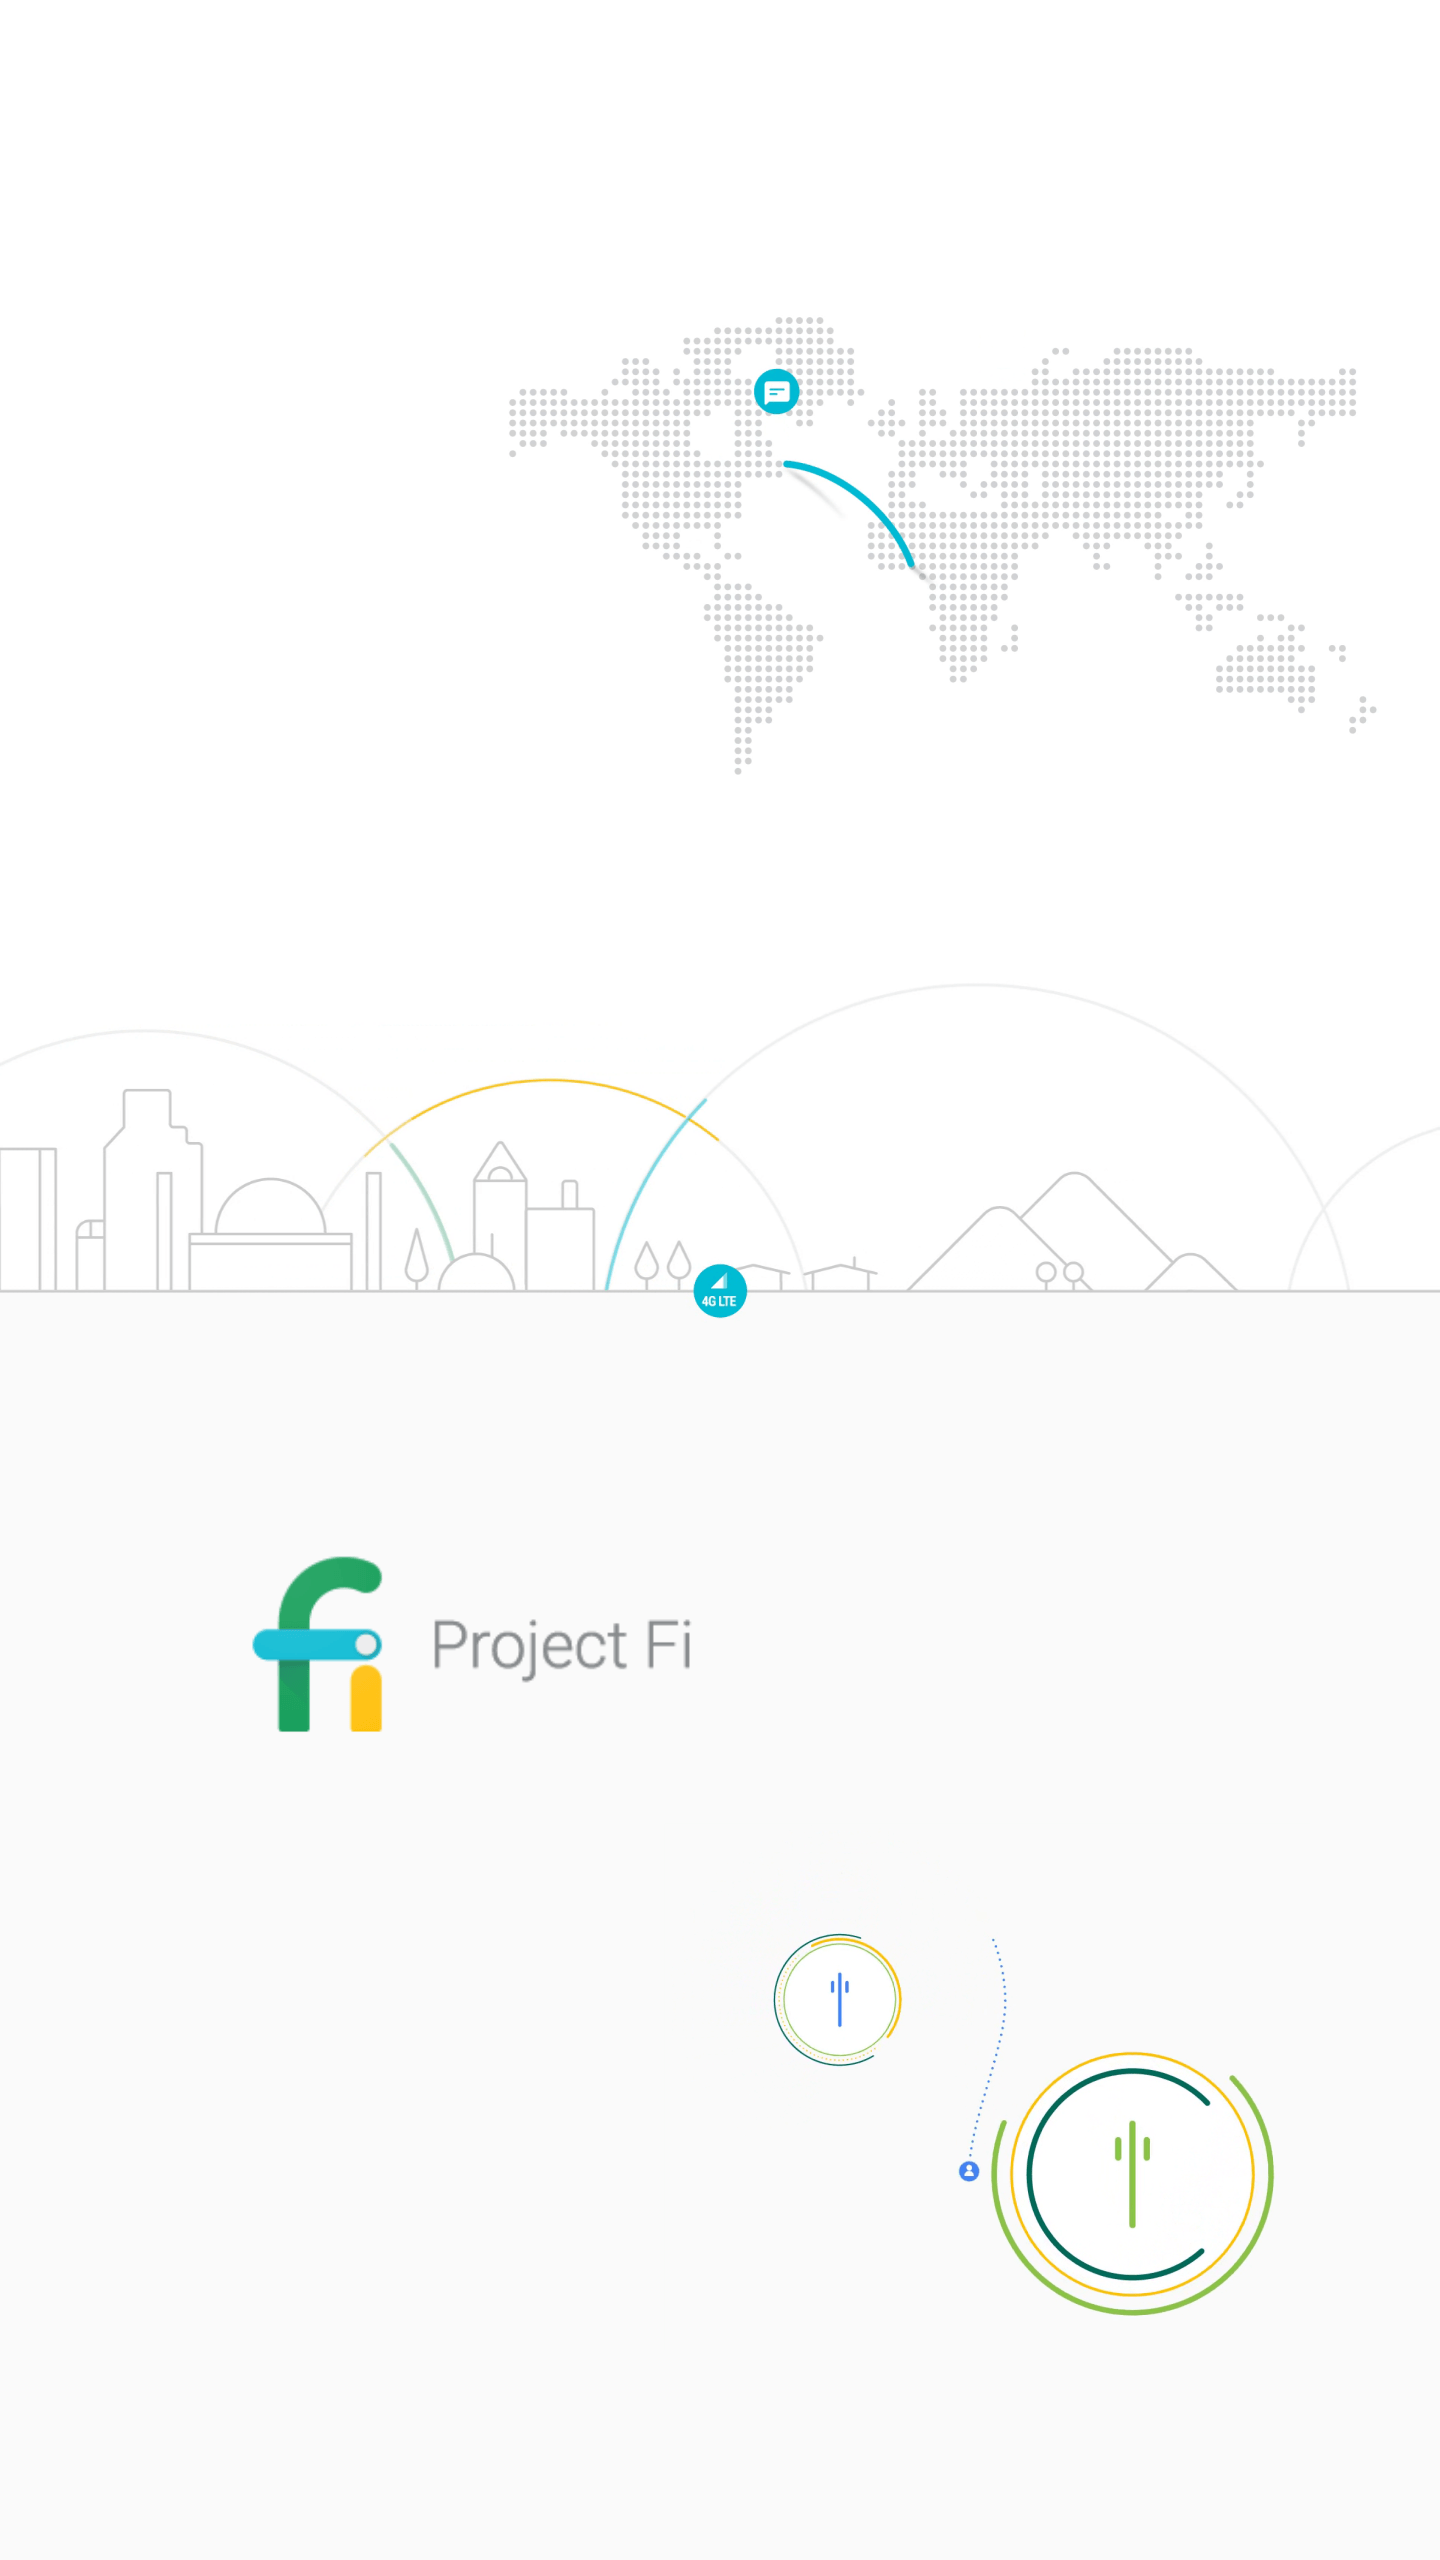 Any good Project Fi wallpaper out there made specifically